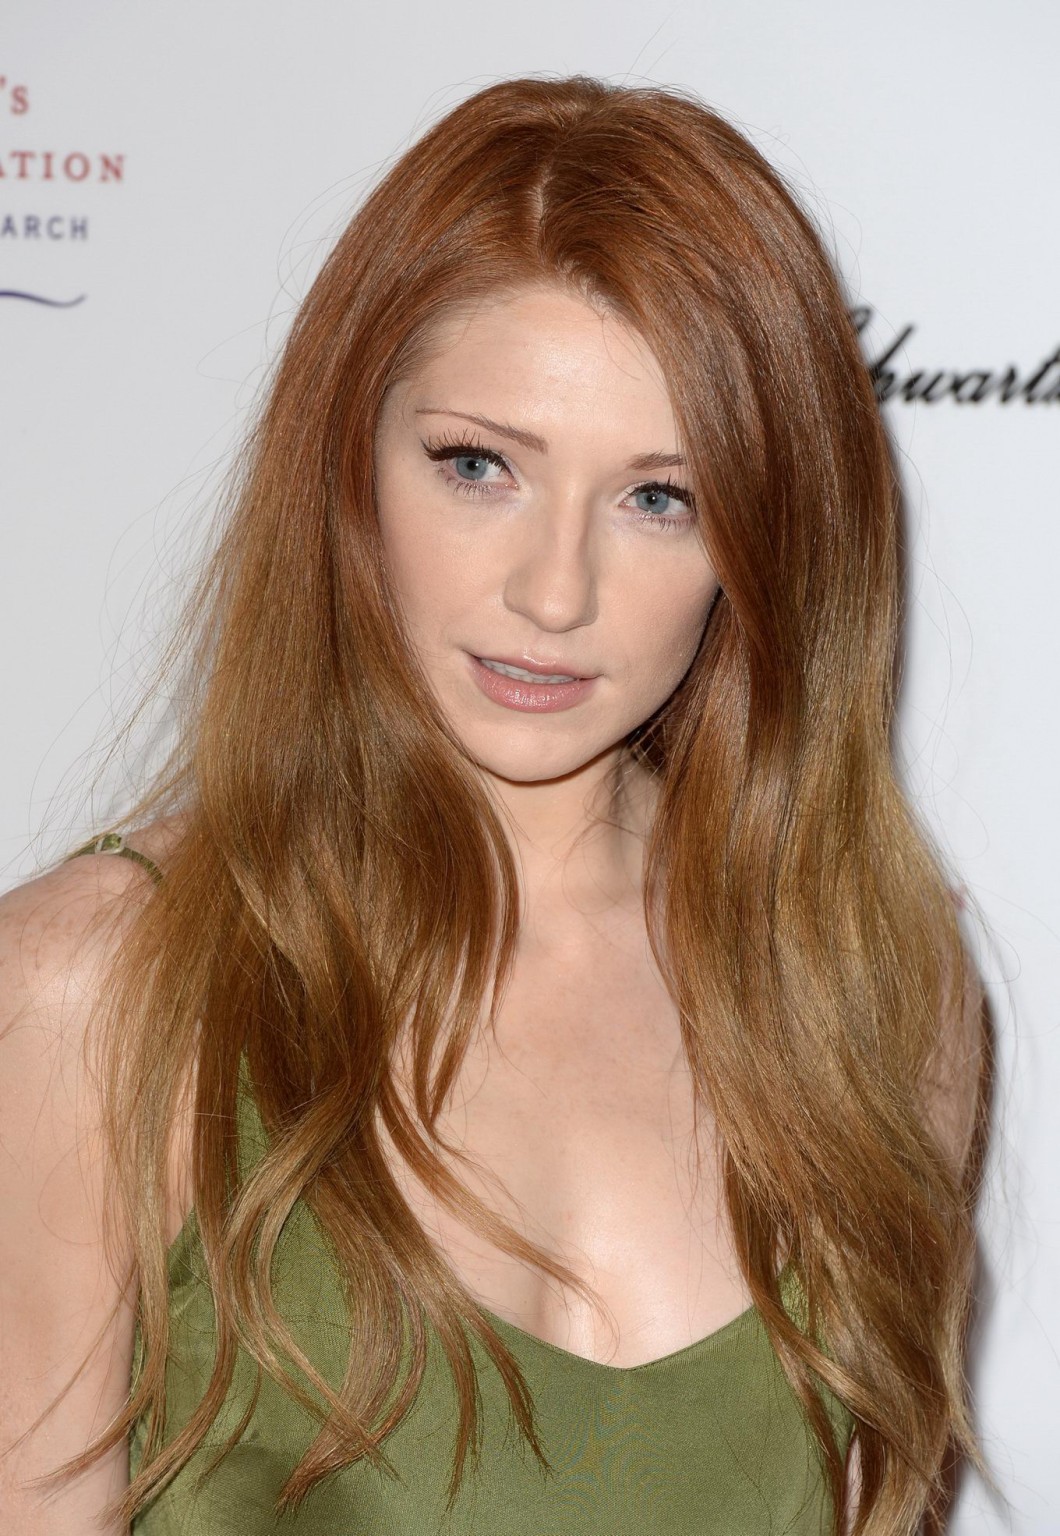 Nicola Roberts cleavy wearing a low cut dress at the Gabrielles Gala fundraiser  #75196729